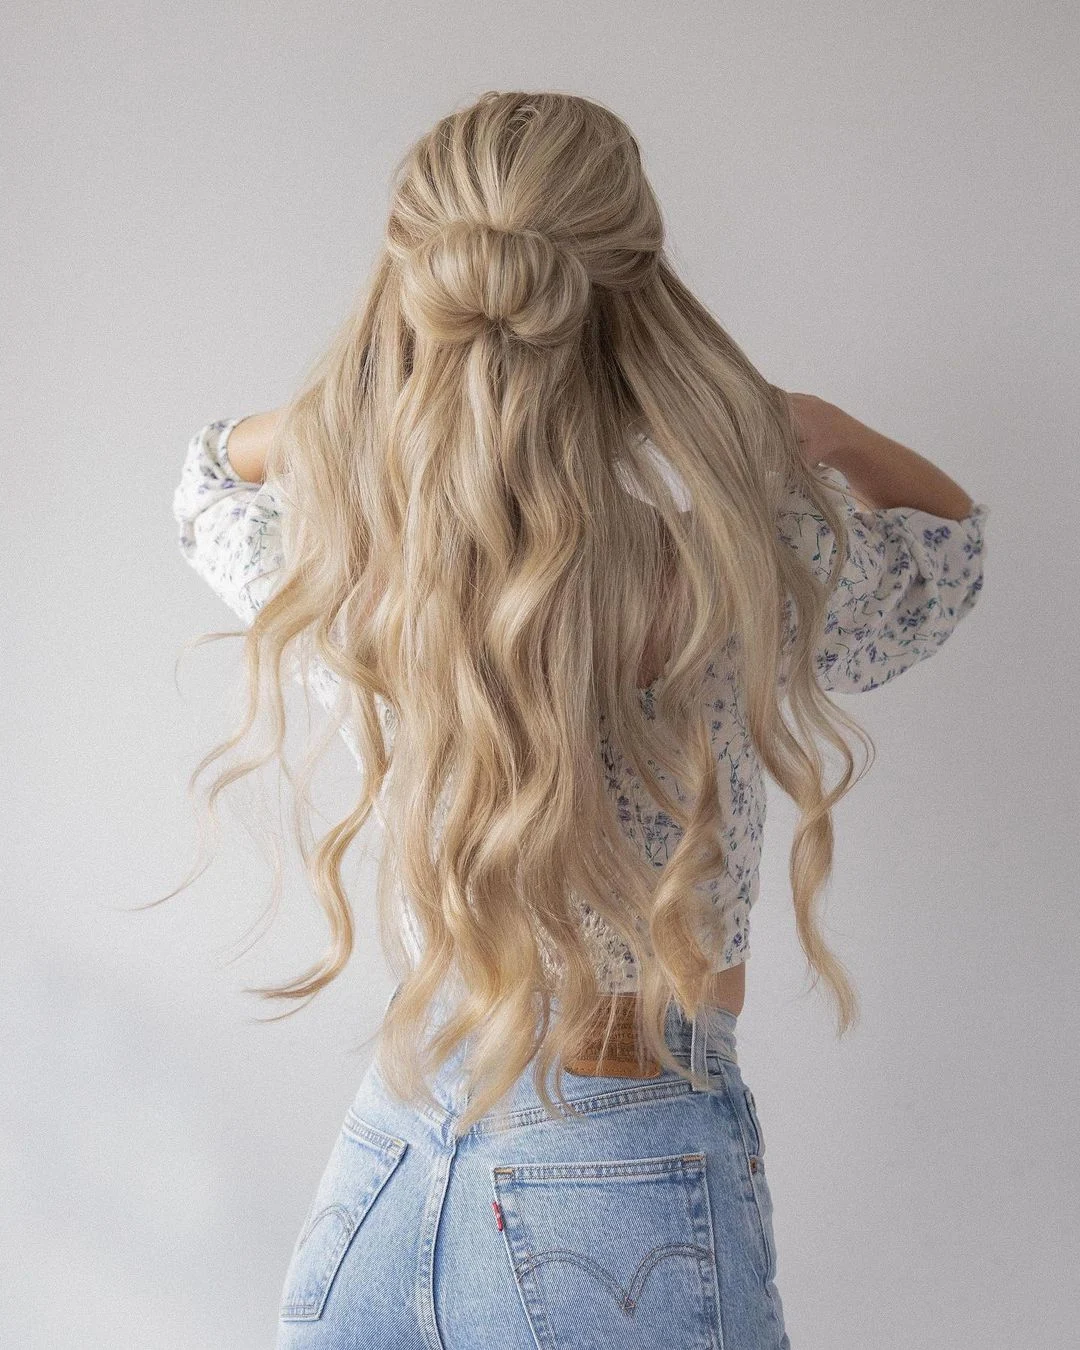 29 Quick and easy hairstyles perfect for prom, weddings, graduation and ...